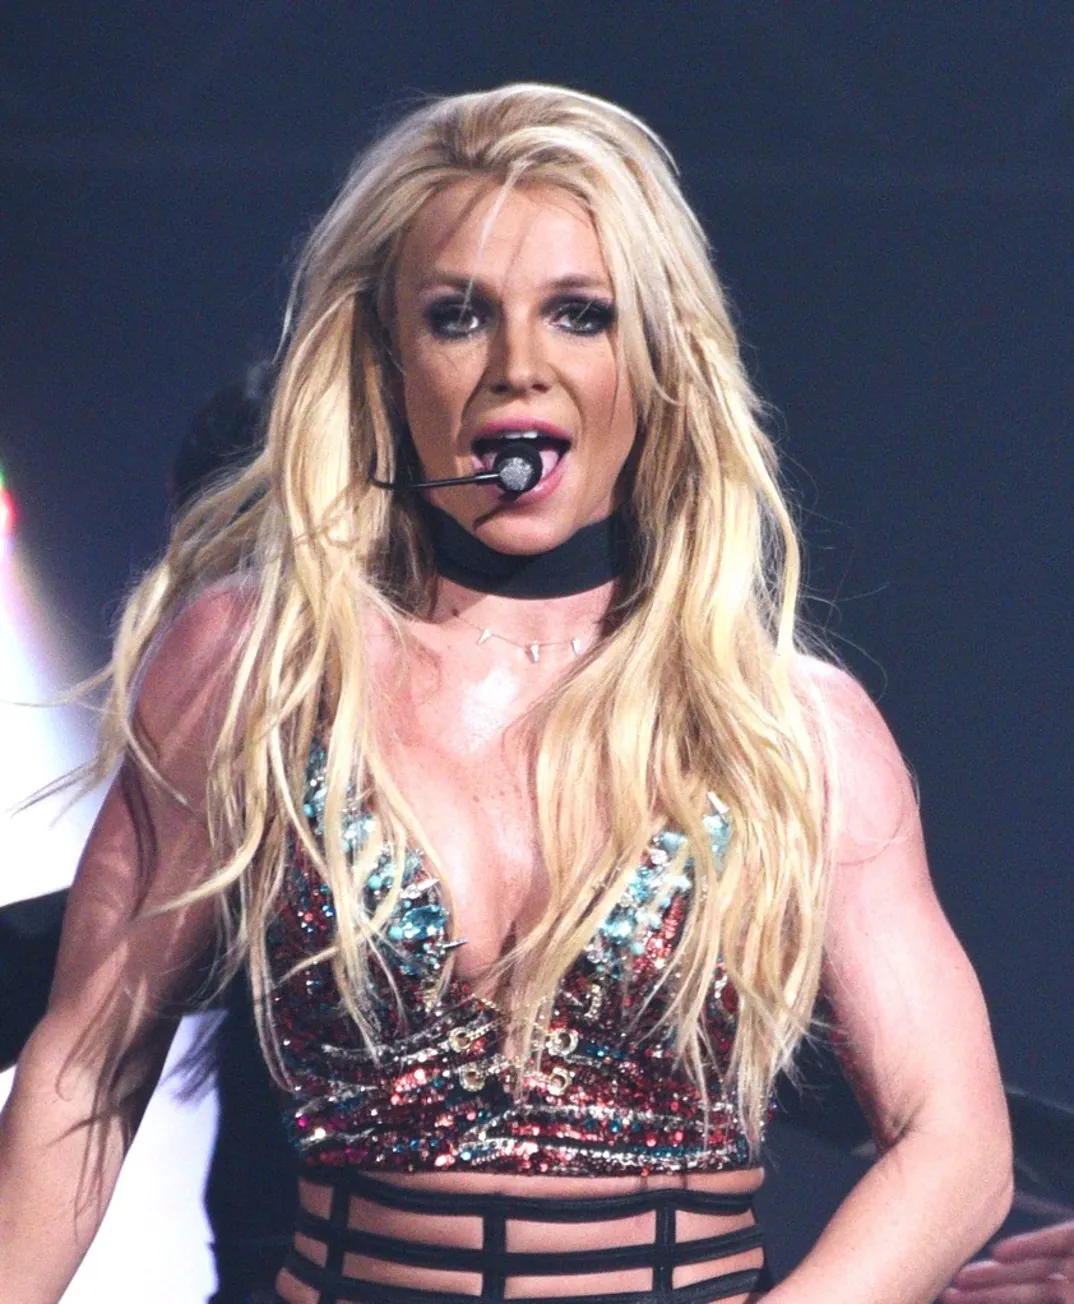 The Britney Spears Dilemma: A Plea for Safety or a Cry for Freedom?